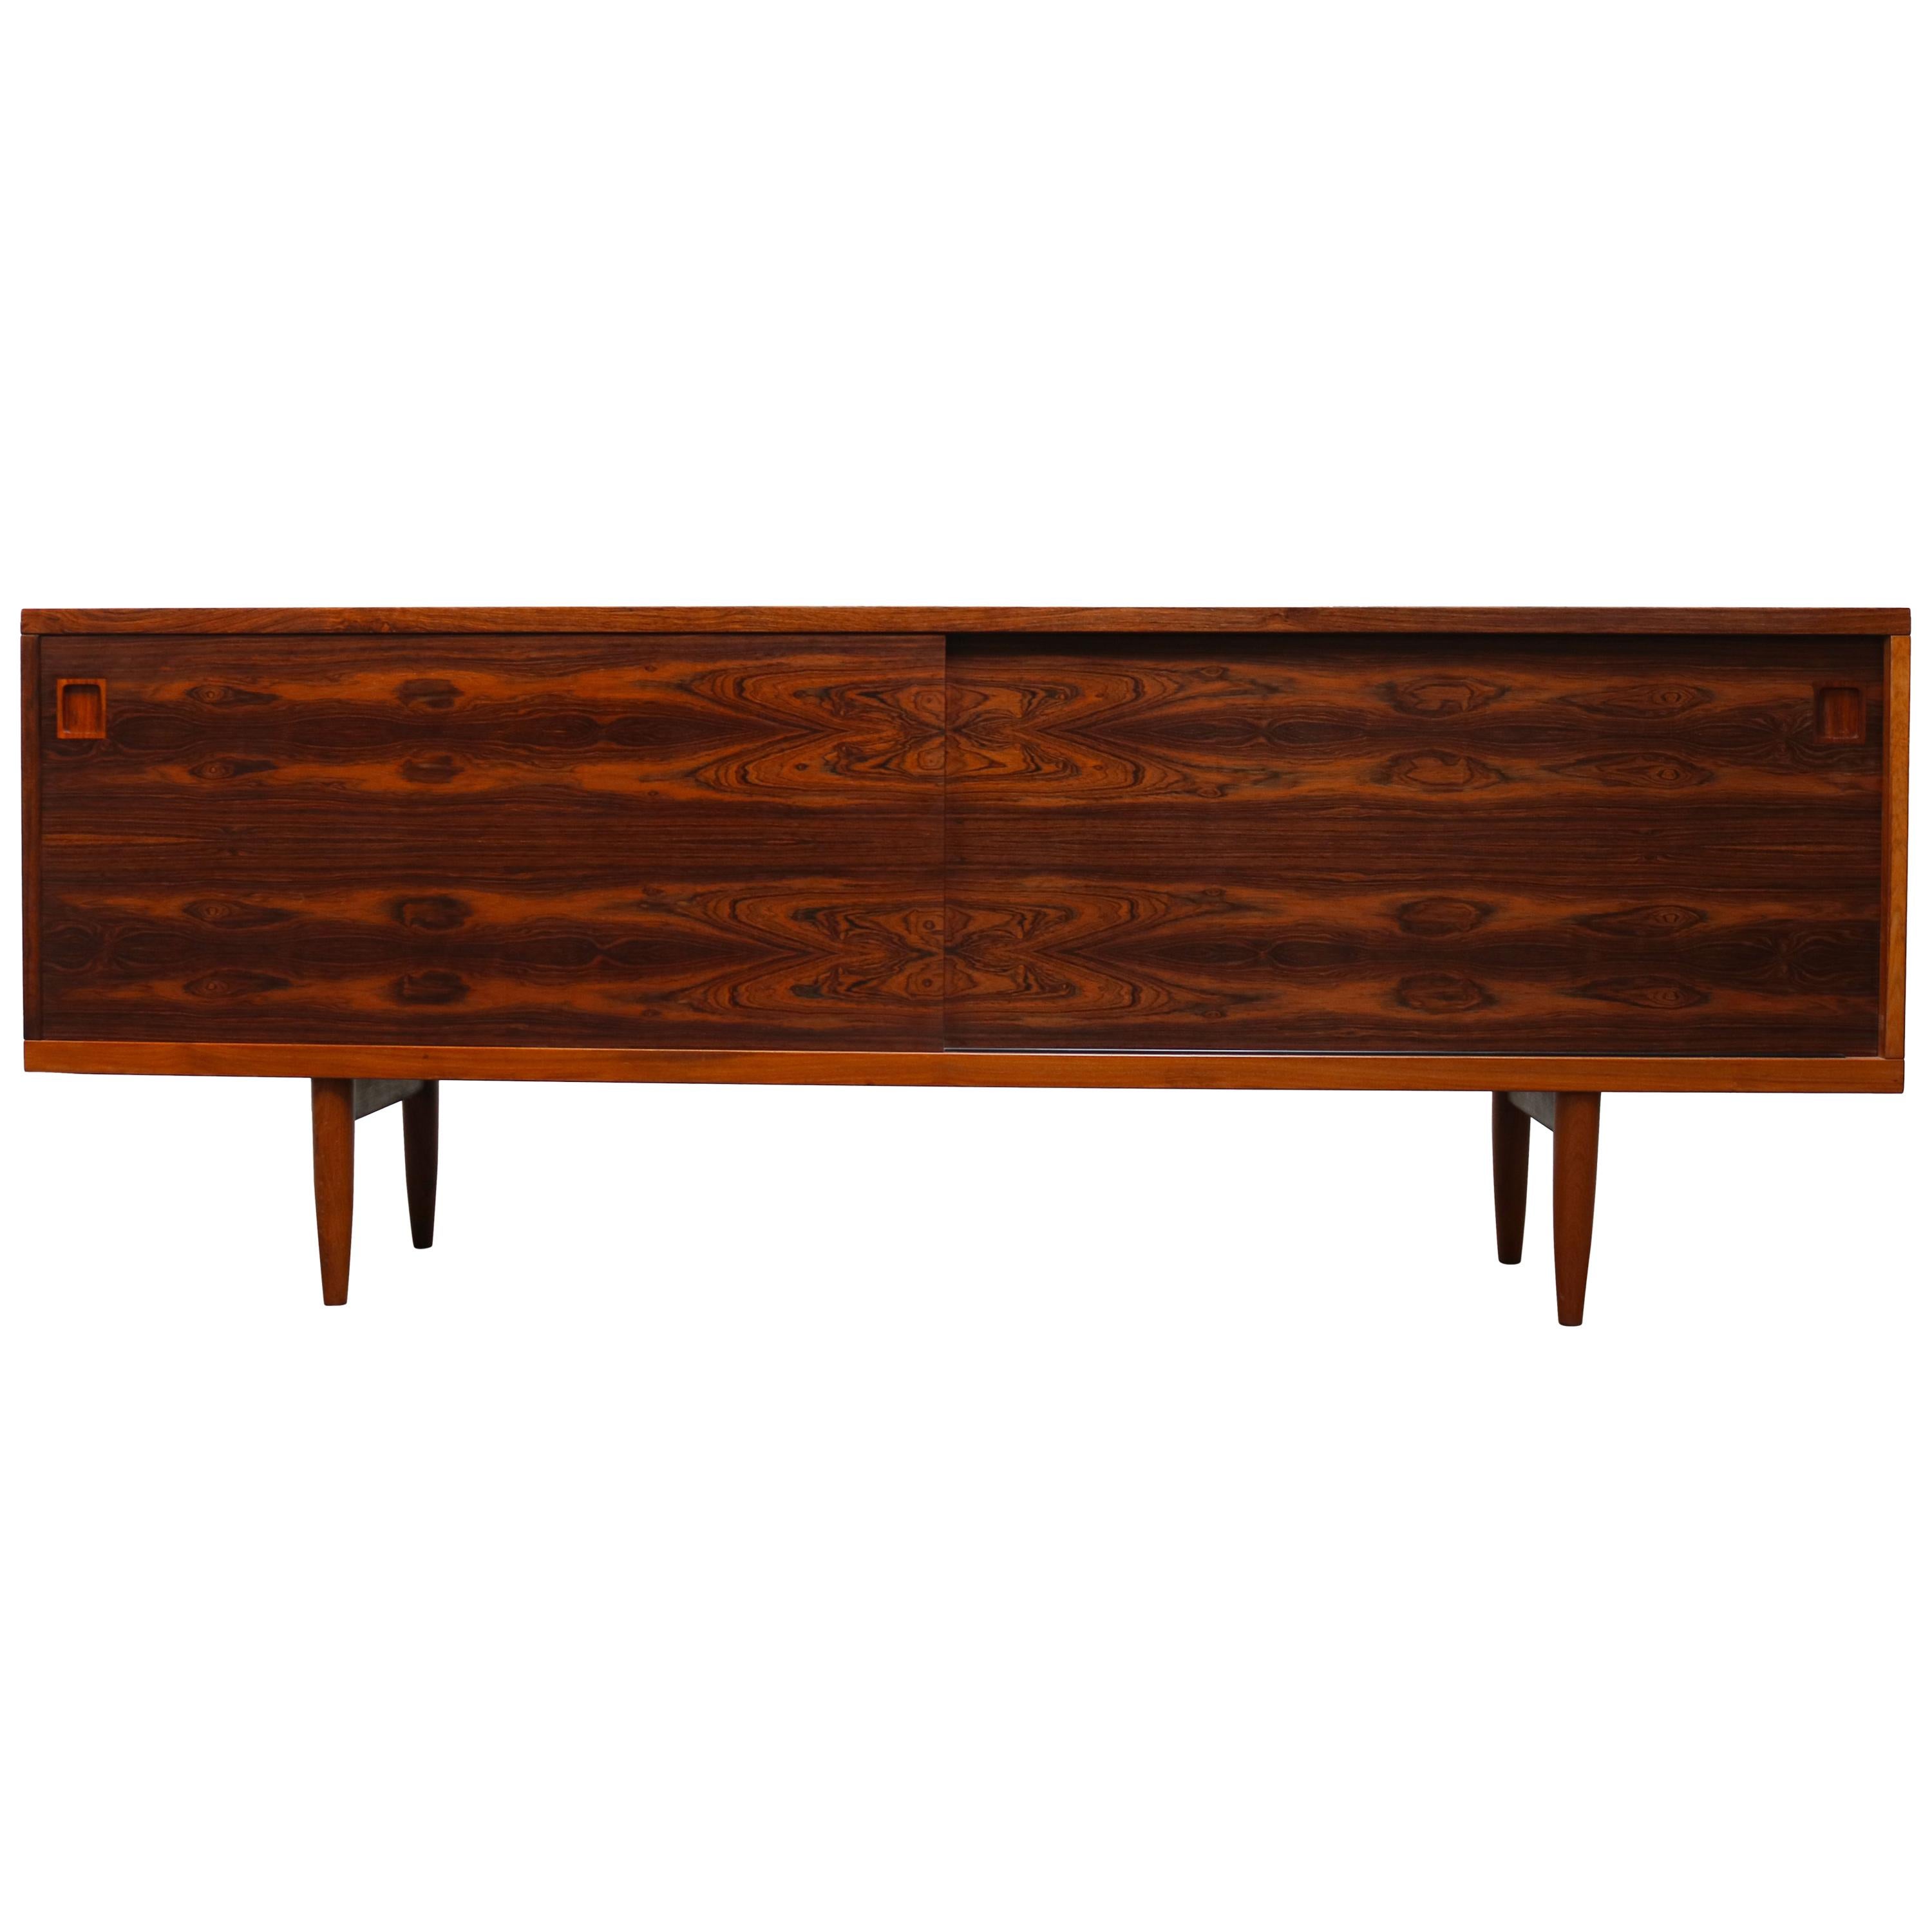 Rare Danish Credenza / Sideboard Model 20 by Niels Otto Moller 1950 Rosewood